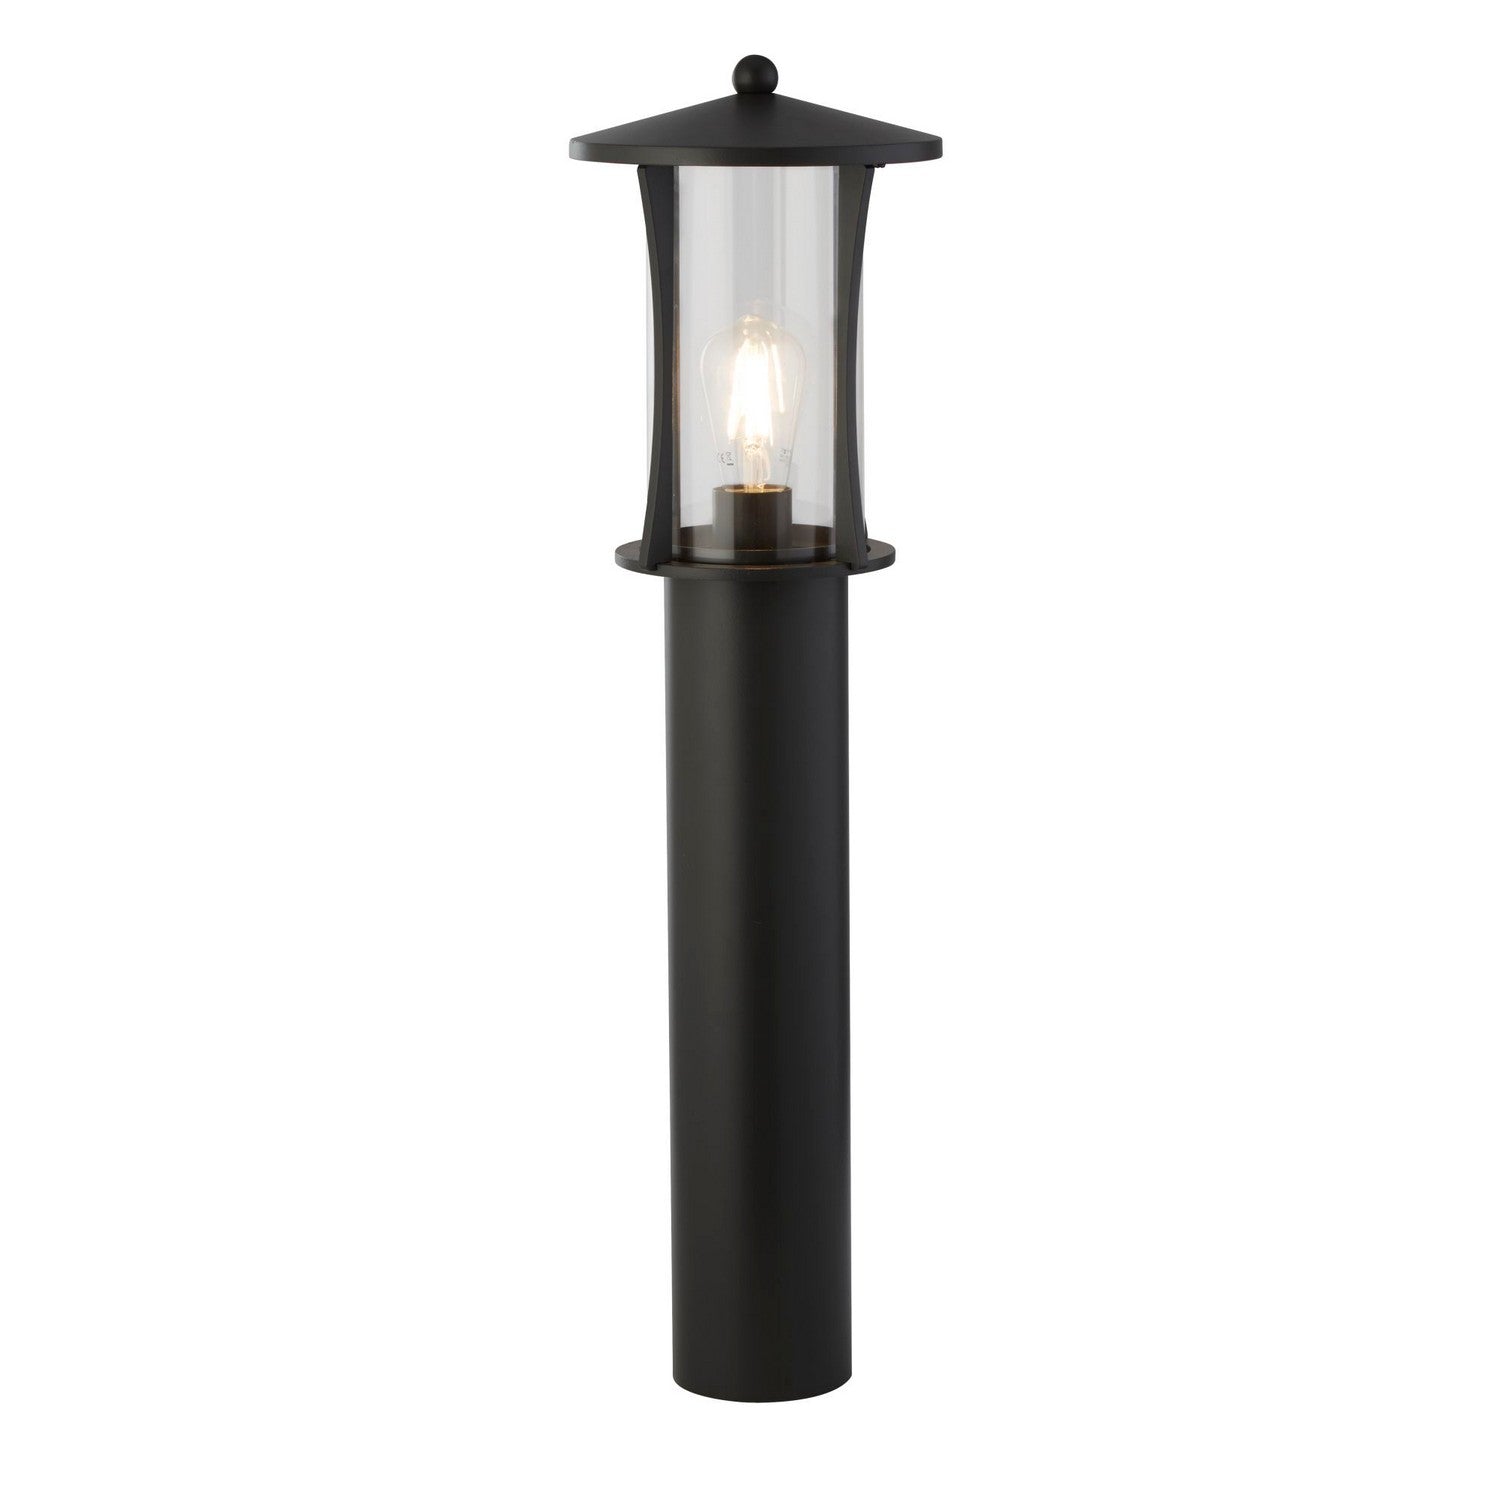 Pagoda 73cm Black Metal & Clear Glass IP44 Outdoor Post